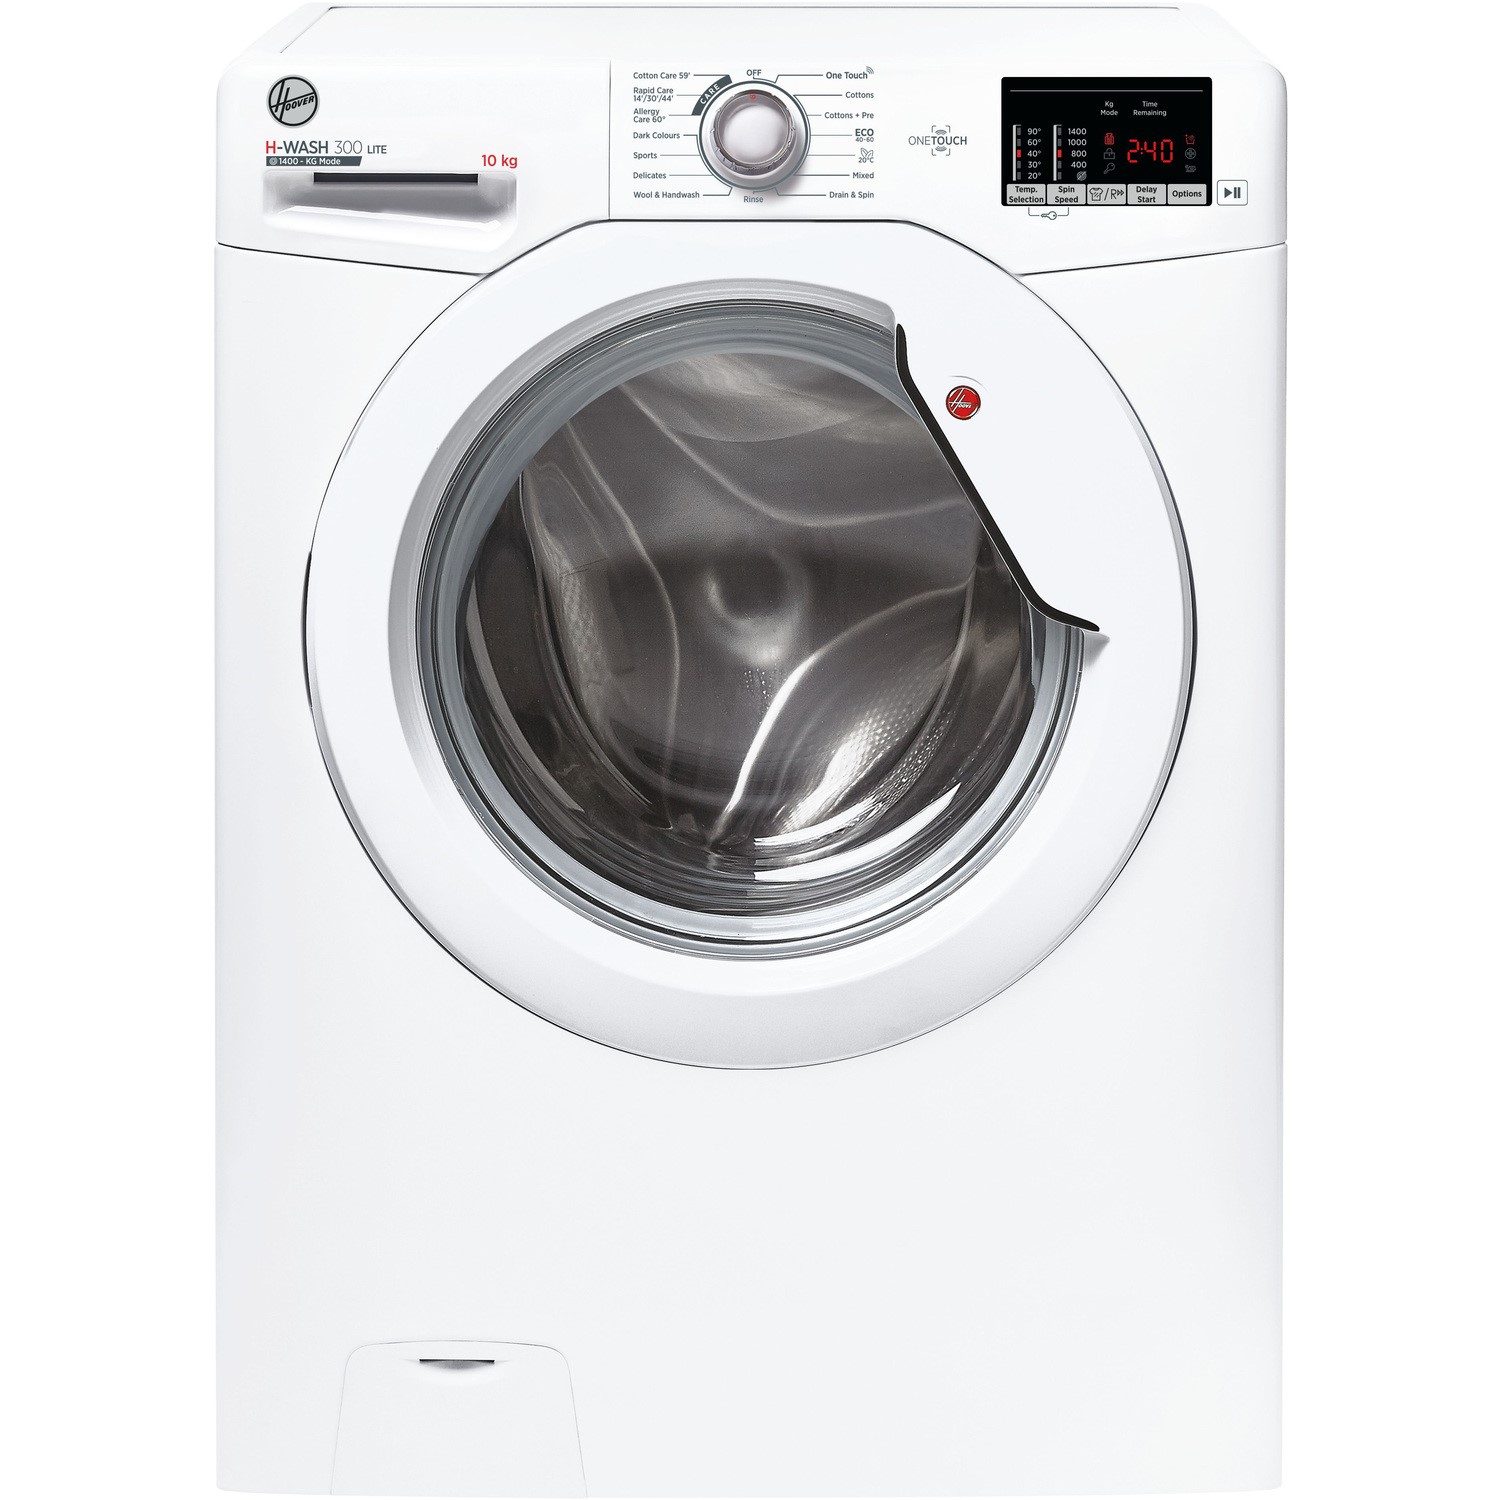 Hoover H-WASH 300 H3W4102DE 10Kg Washing Machine with 1400 rpm - White - E Rated